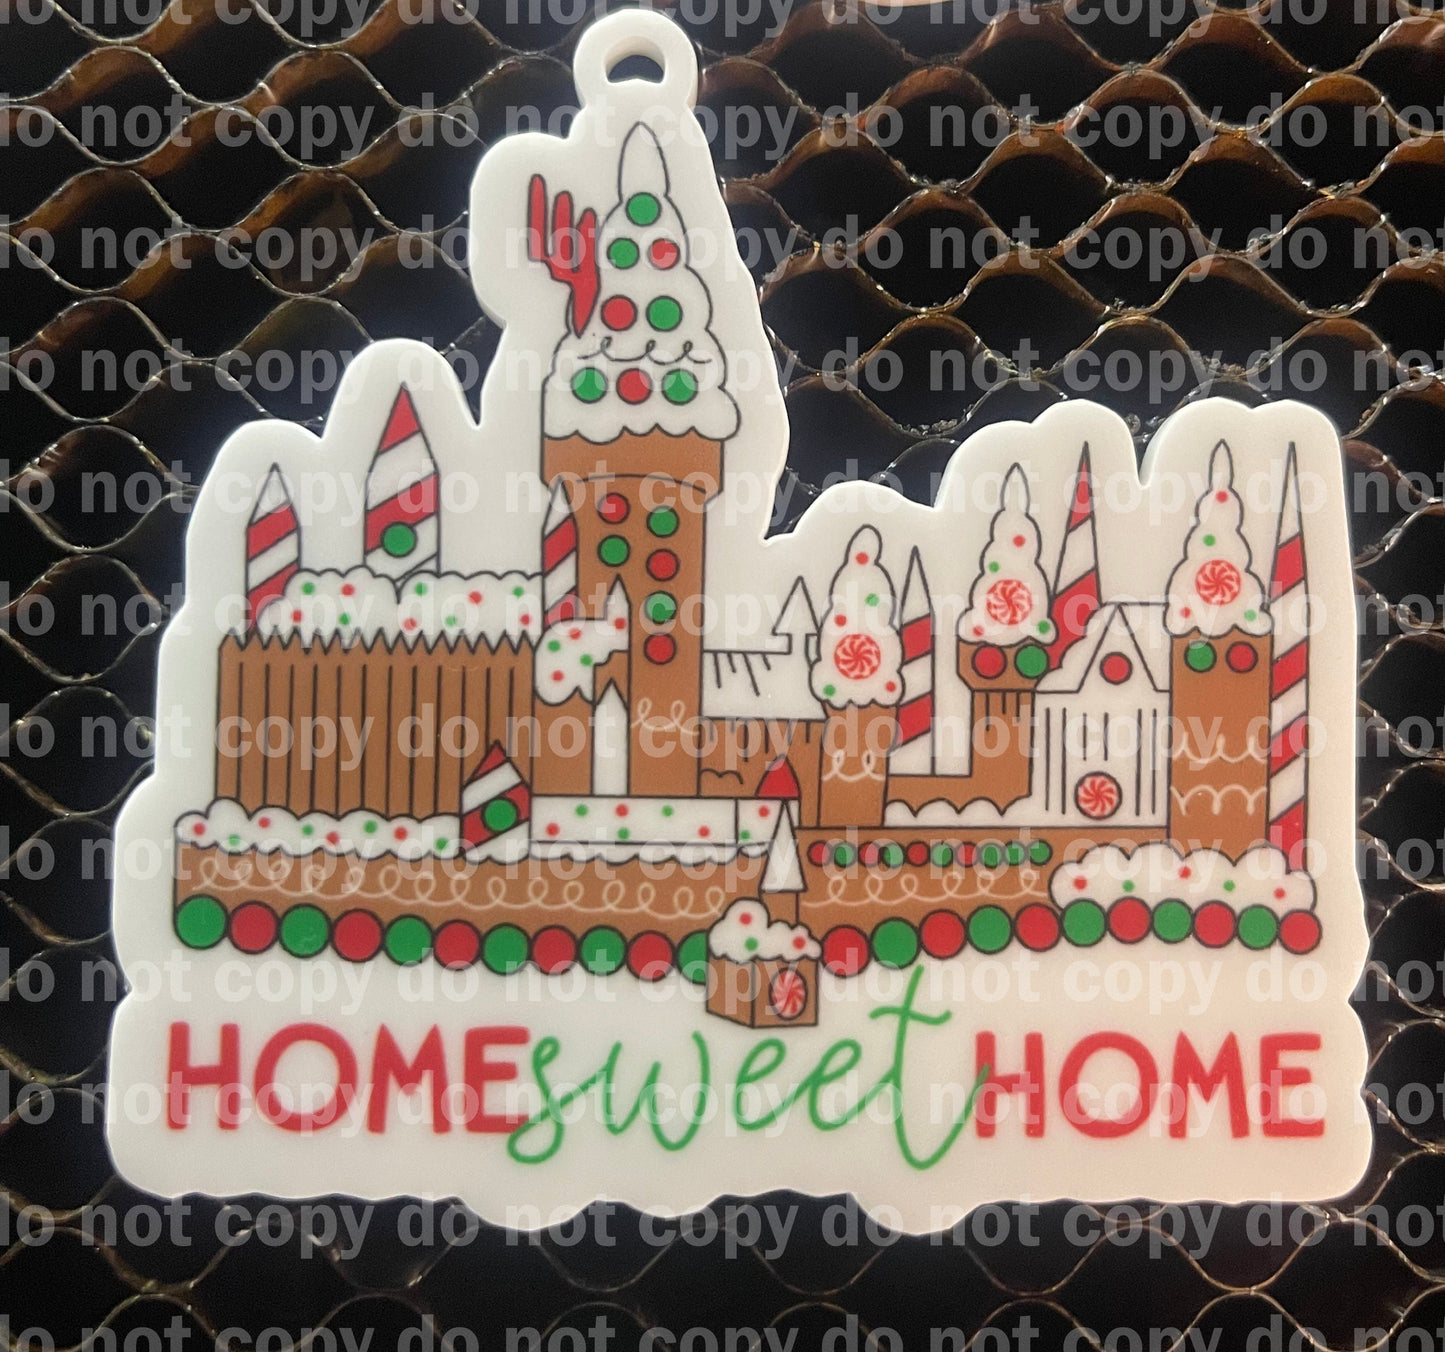 Home sweet home gingerbread house castle Christmas ornament uv print and acrylic